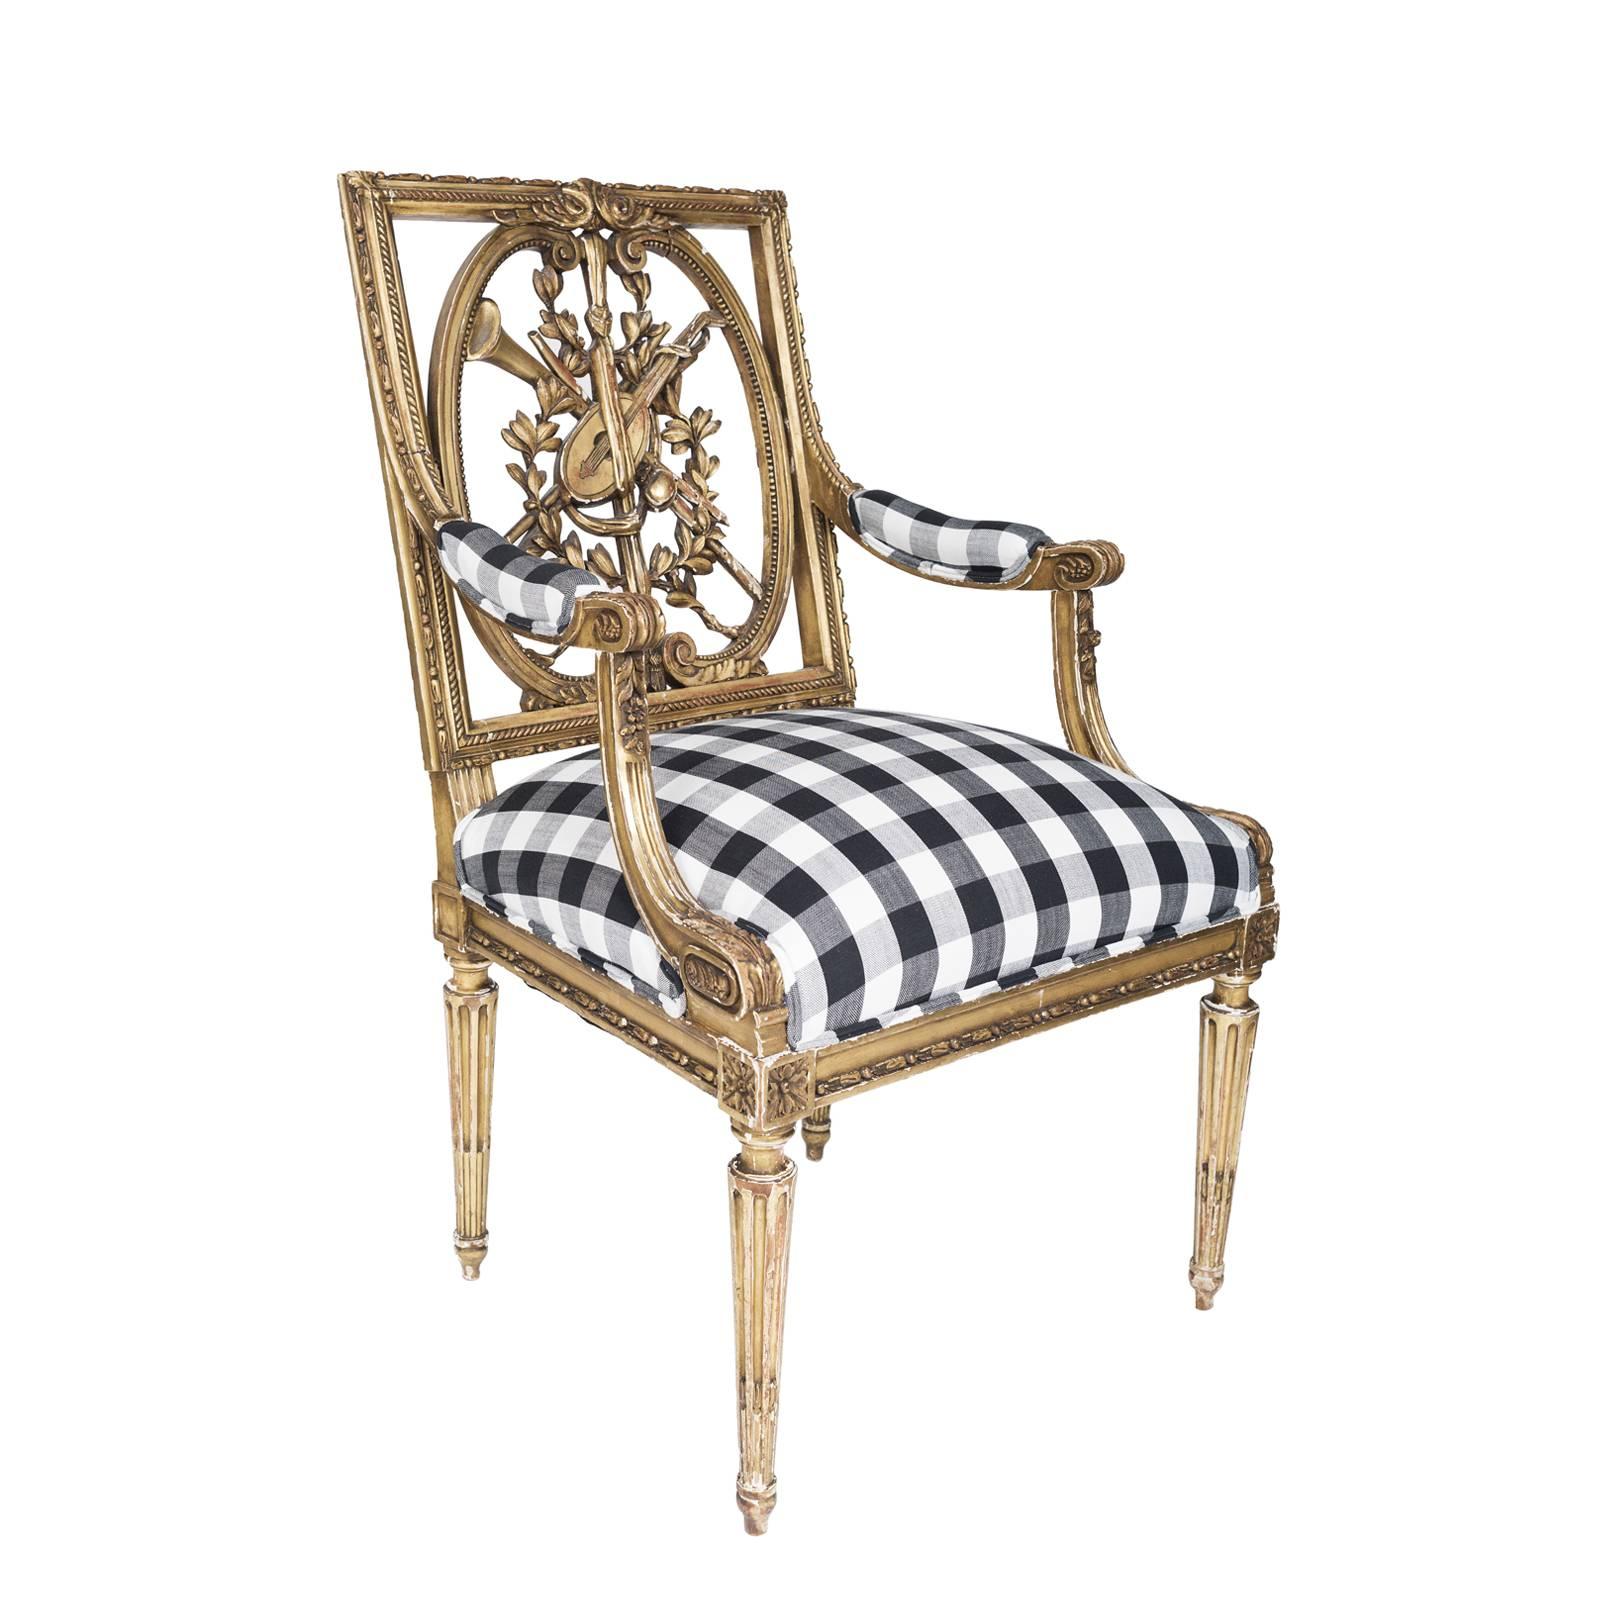 Beautiful giltwood fauteuil chair.
Great conditions.
Seat and armrests on Wexford fabric.
Recently reupholstered.